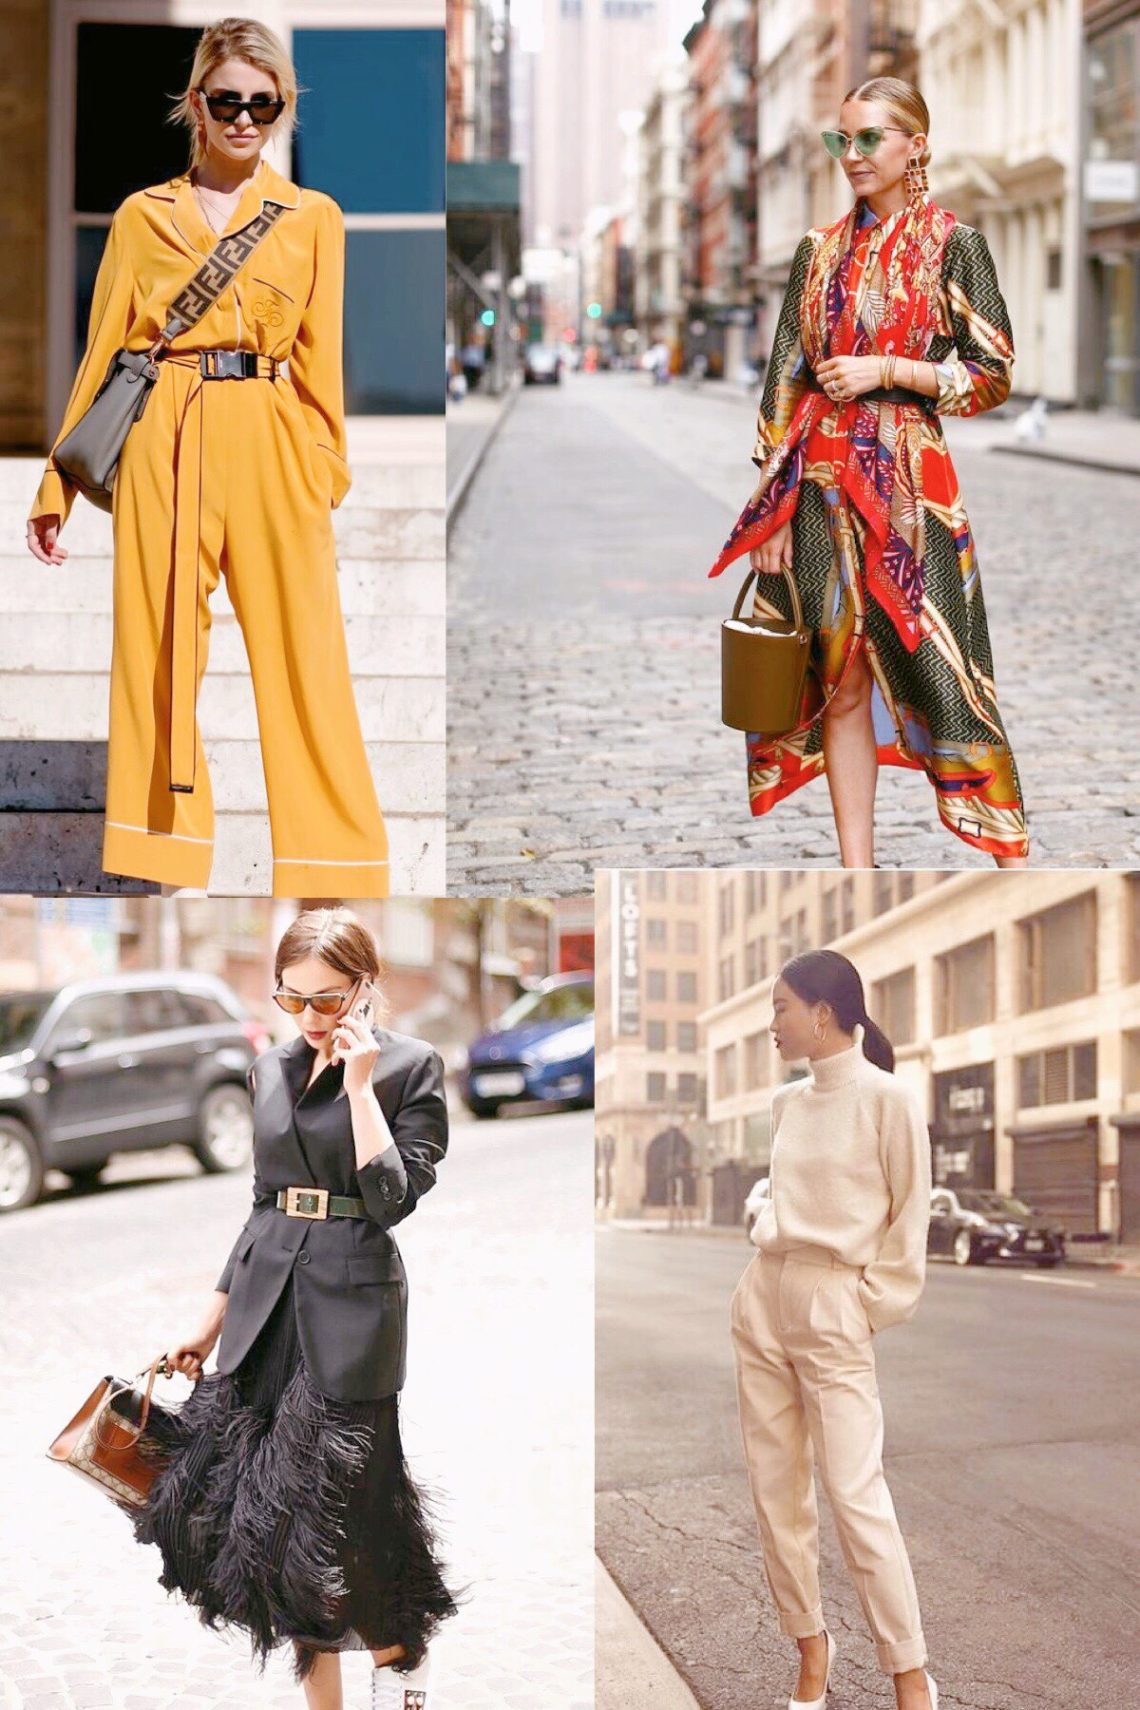 alt="Spring 2019 Fashion Trends To Look Forward To"